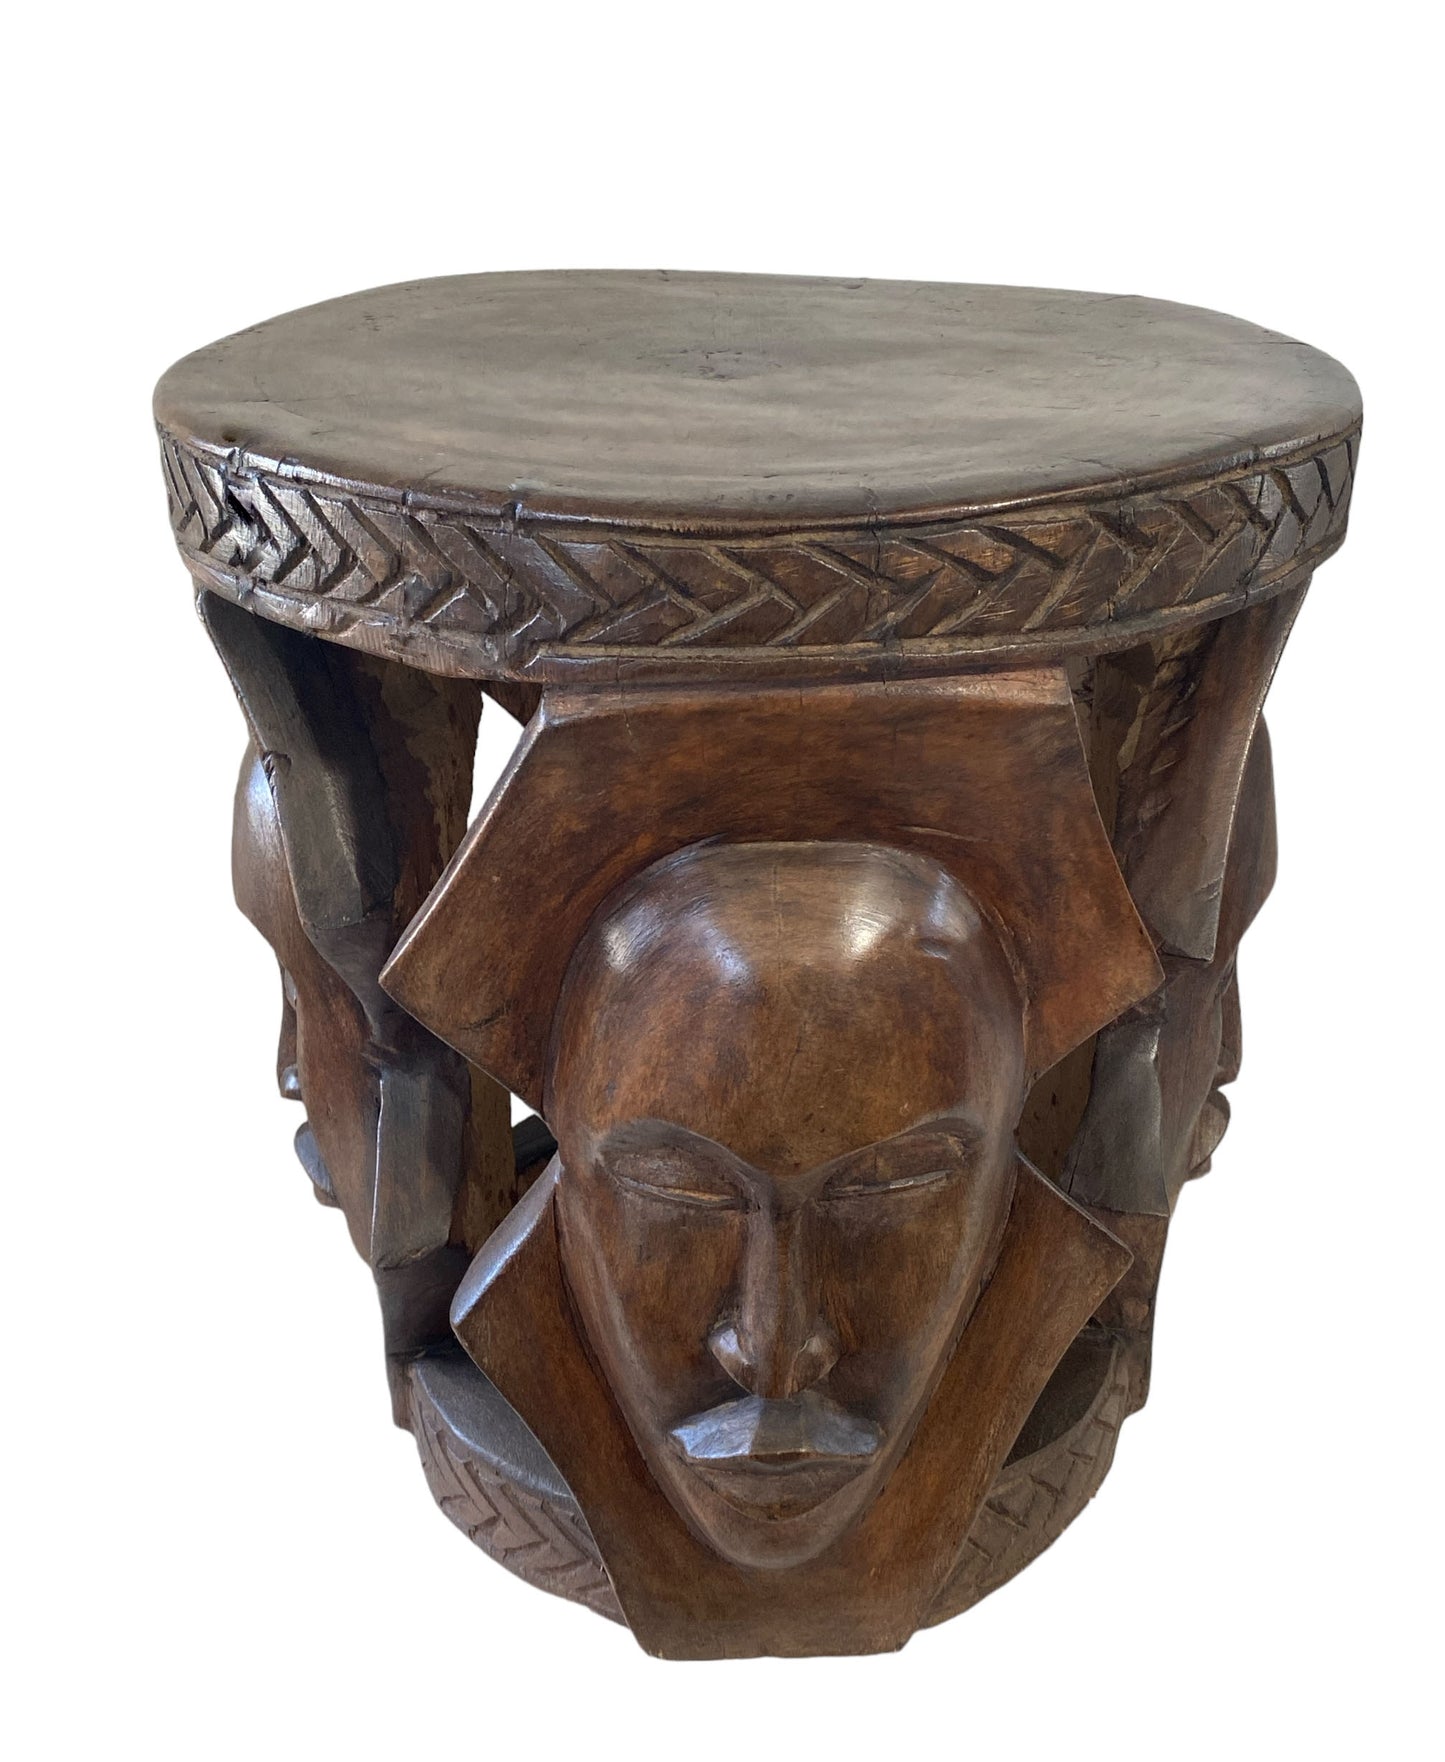 #5947 Superb LG African Carved wood  Baga  Stool/Table  Guinea 19" H